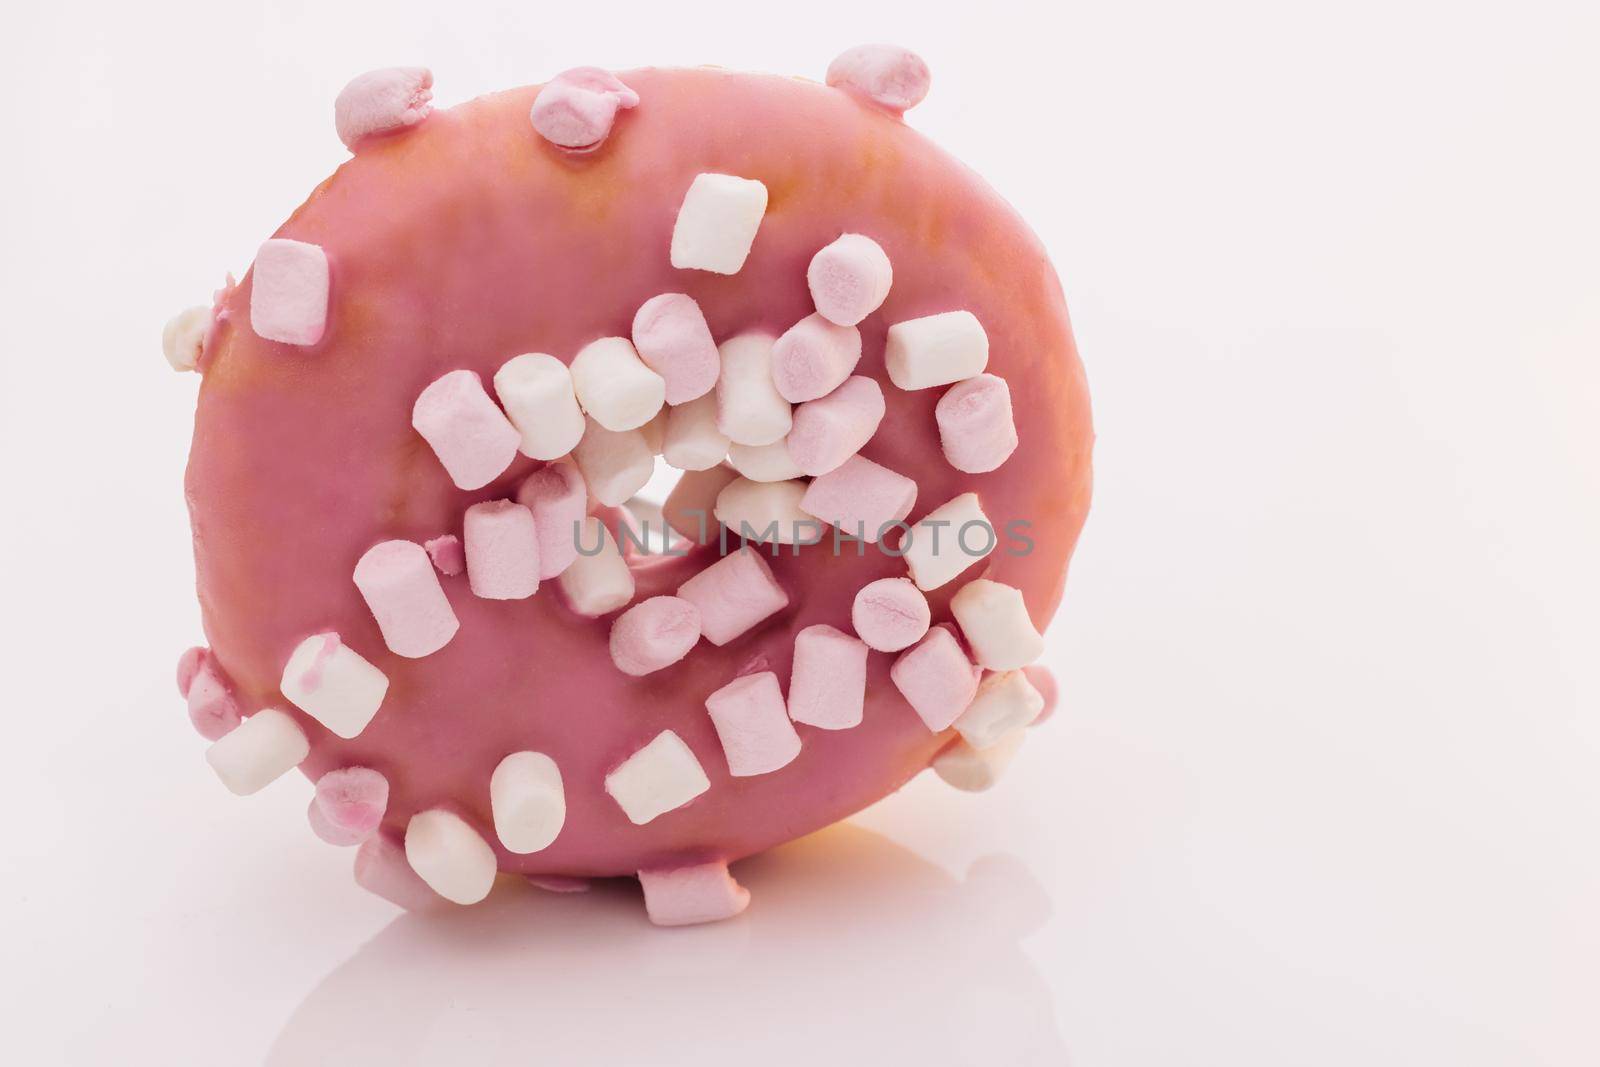 Pink glazed marshmallow donut. Bright and colorful sprinkled donut on a white background. Assortment of donuts of different flavors by uflypro